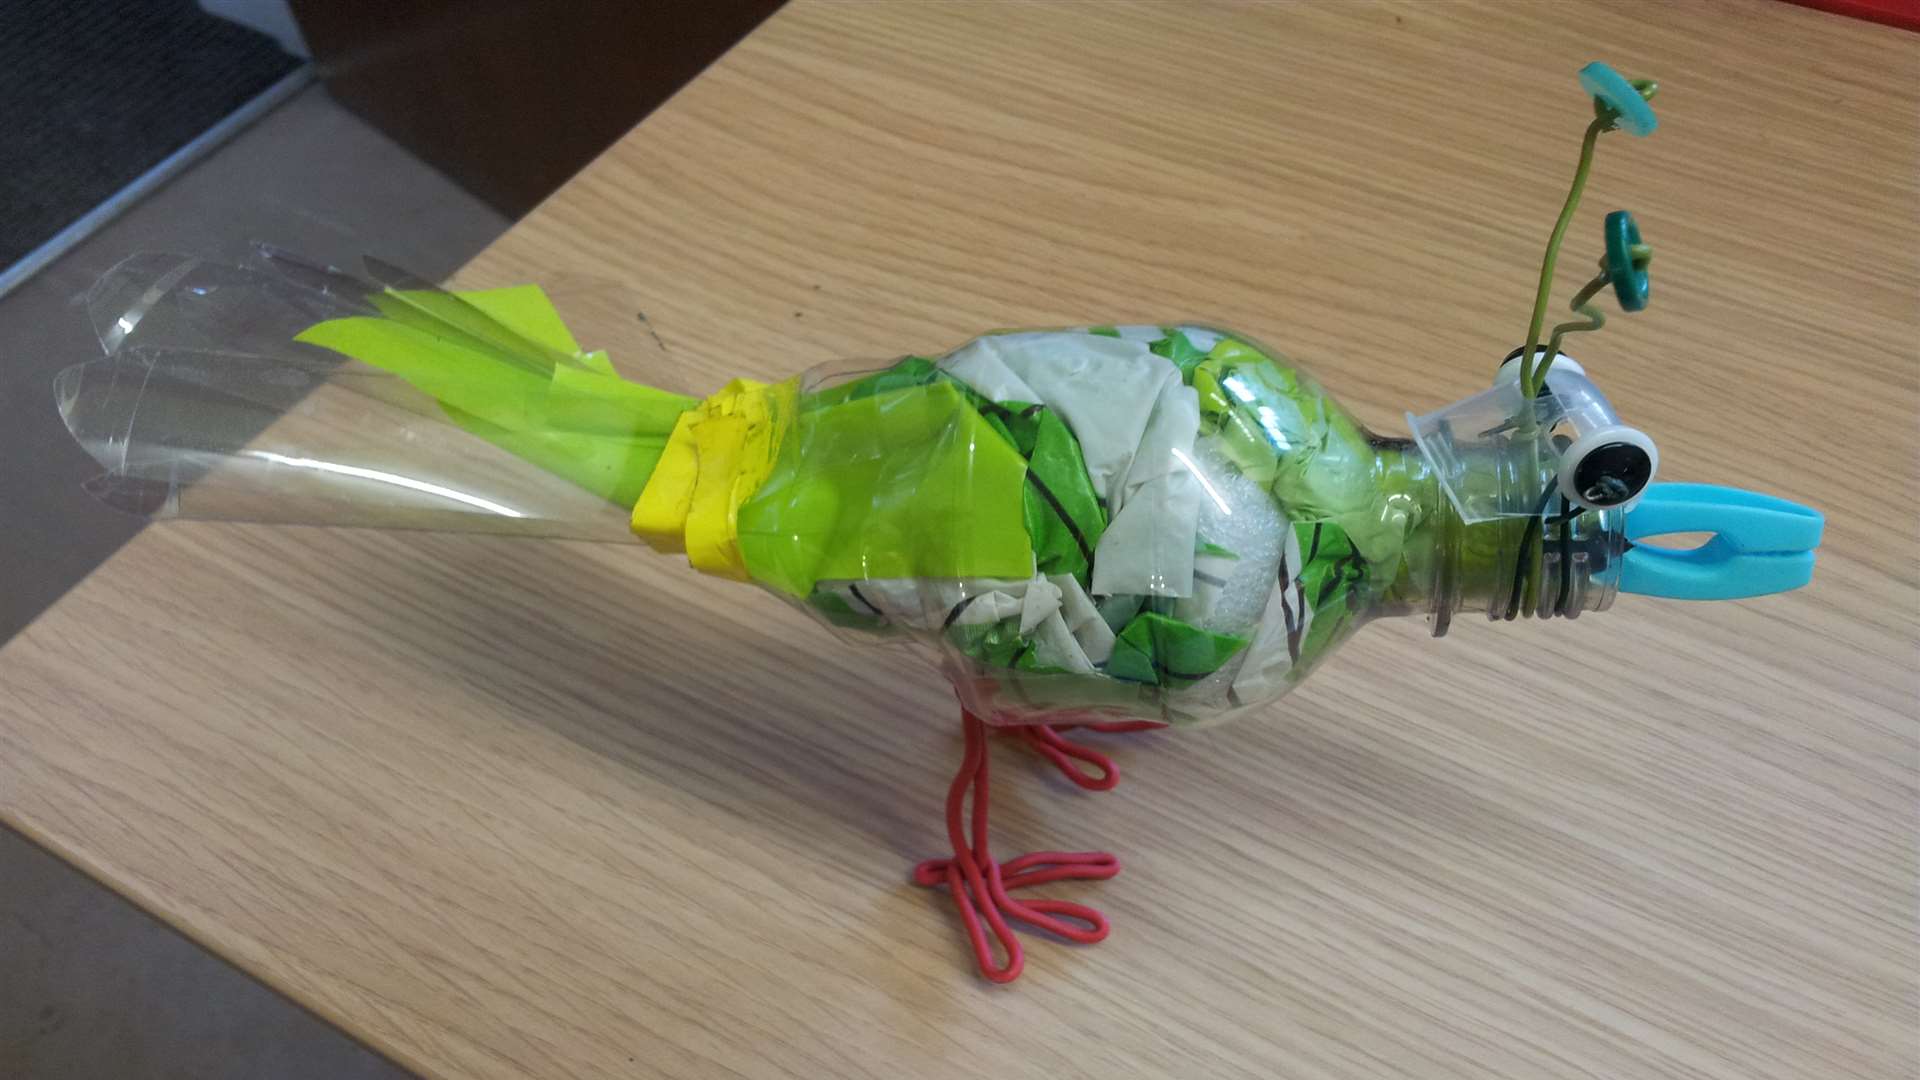 You could make a bird from recycled materials at Kent Wildlife Trust